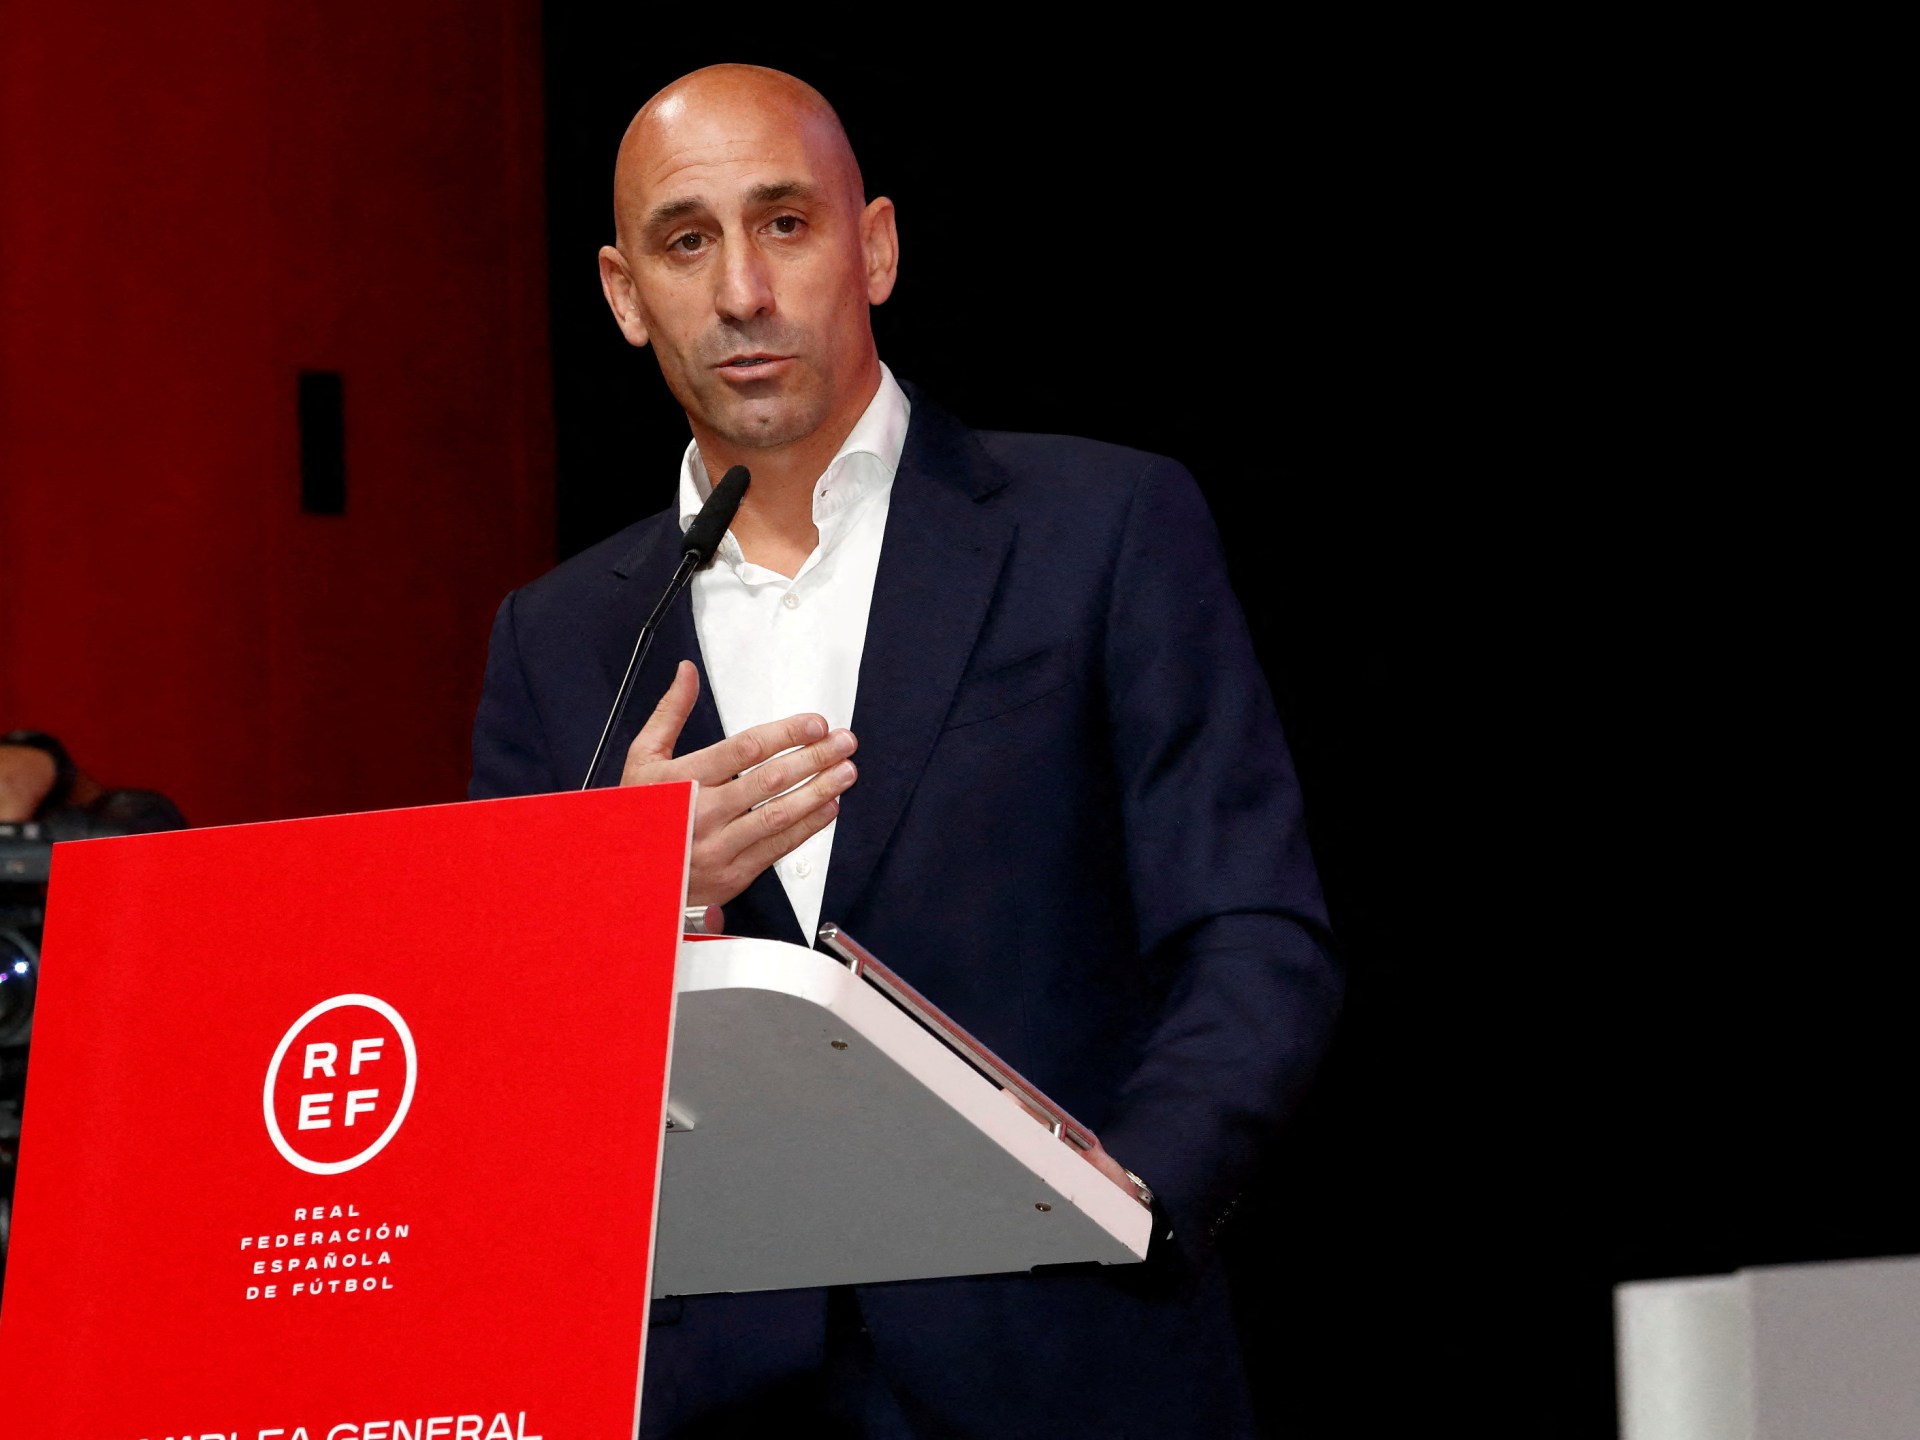 FIFA suspends Spanish football president Rubiales for 90 days after kiss